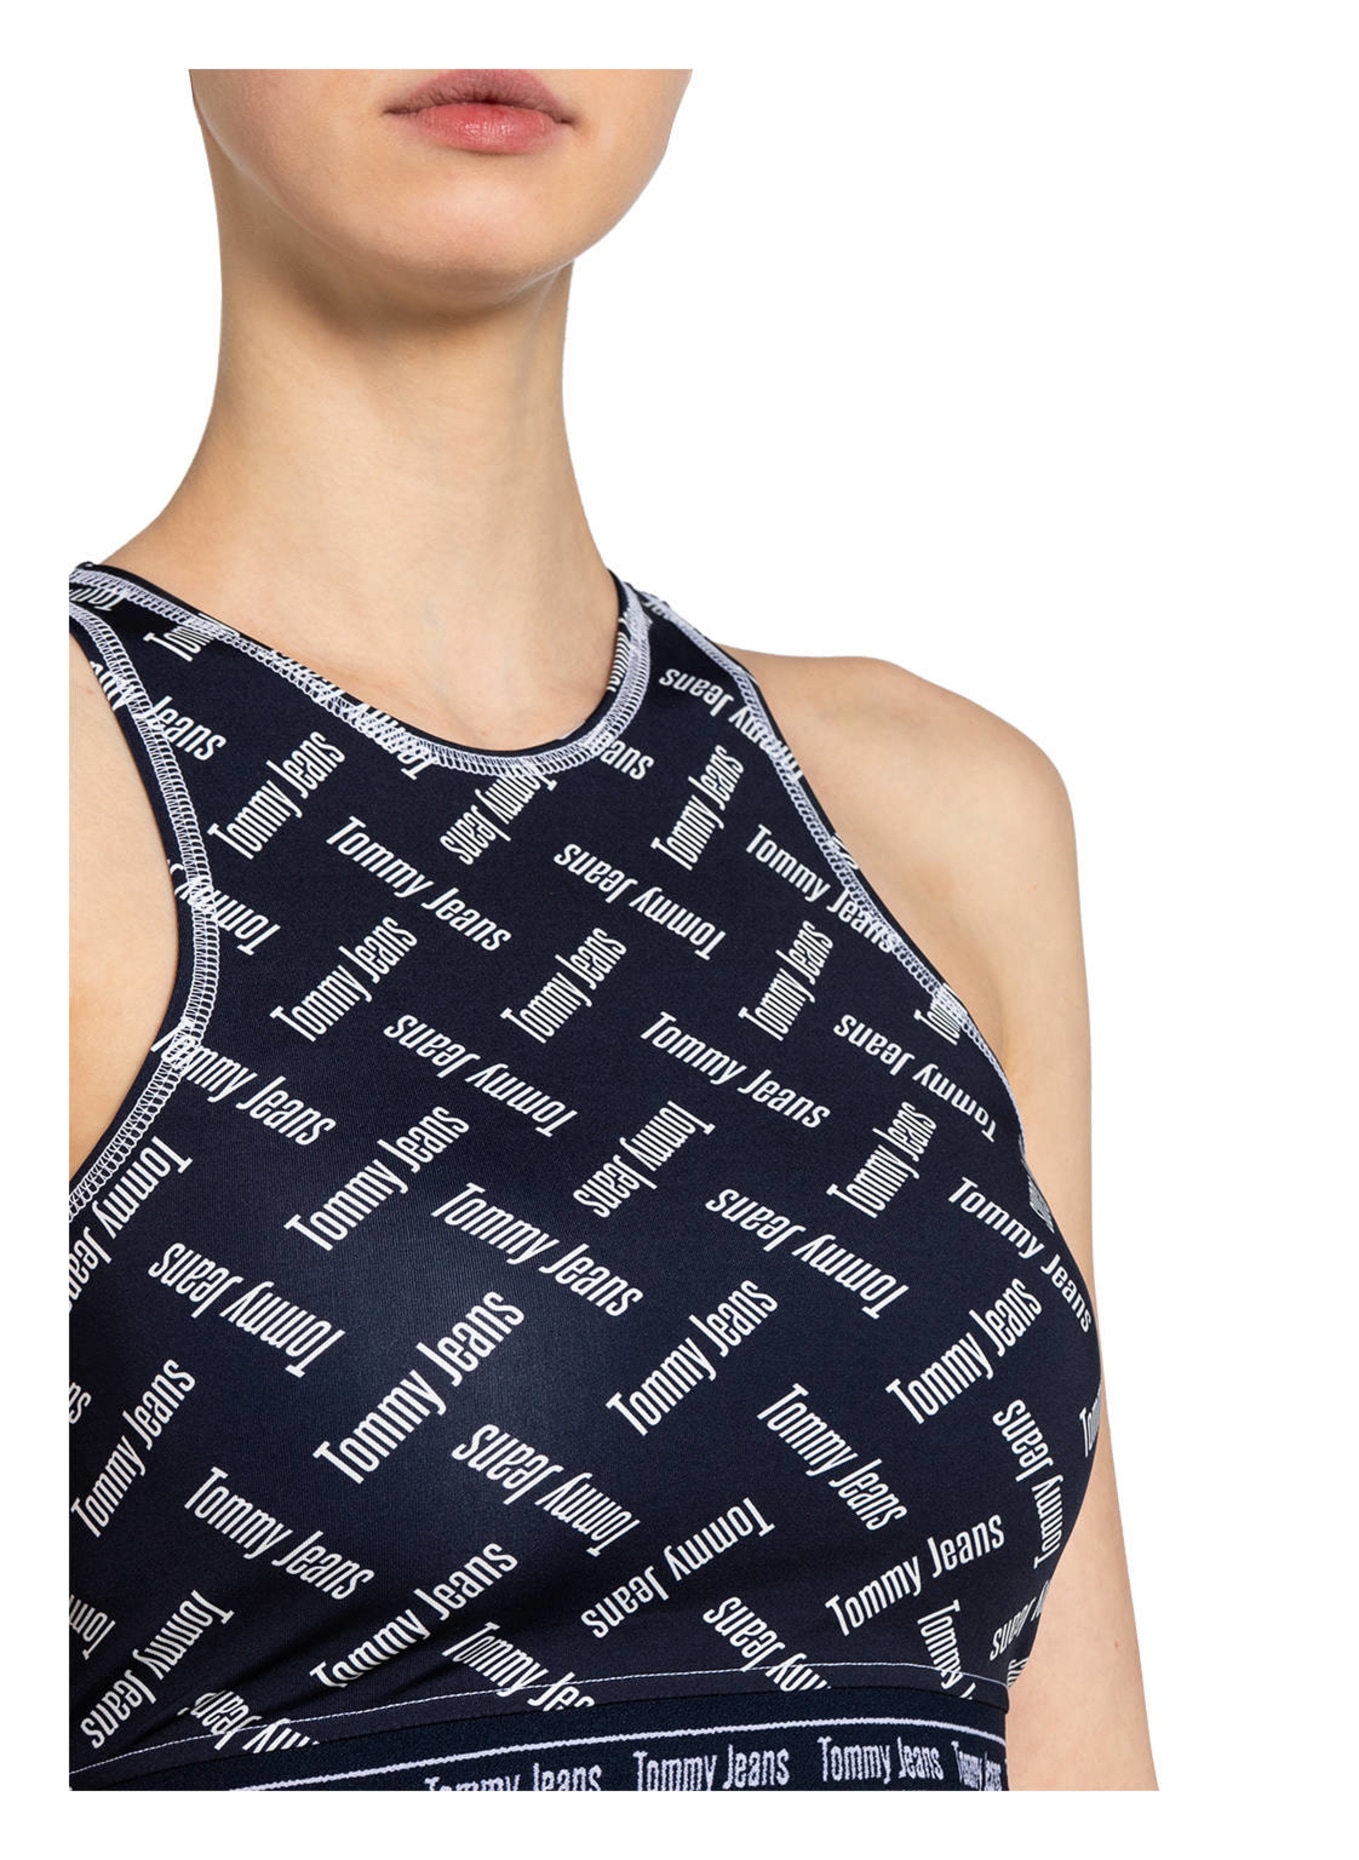 TOMMY JEANS Tank top, Color: DARK BLUE/ WHITE (Image 4)